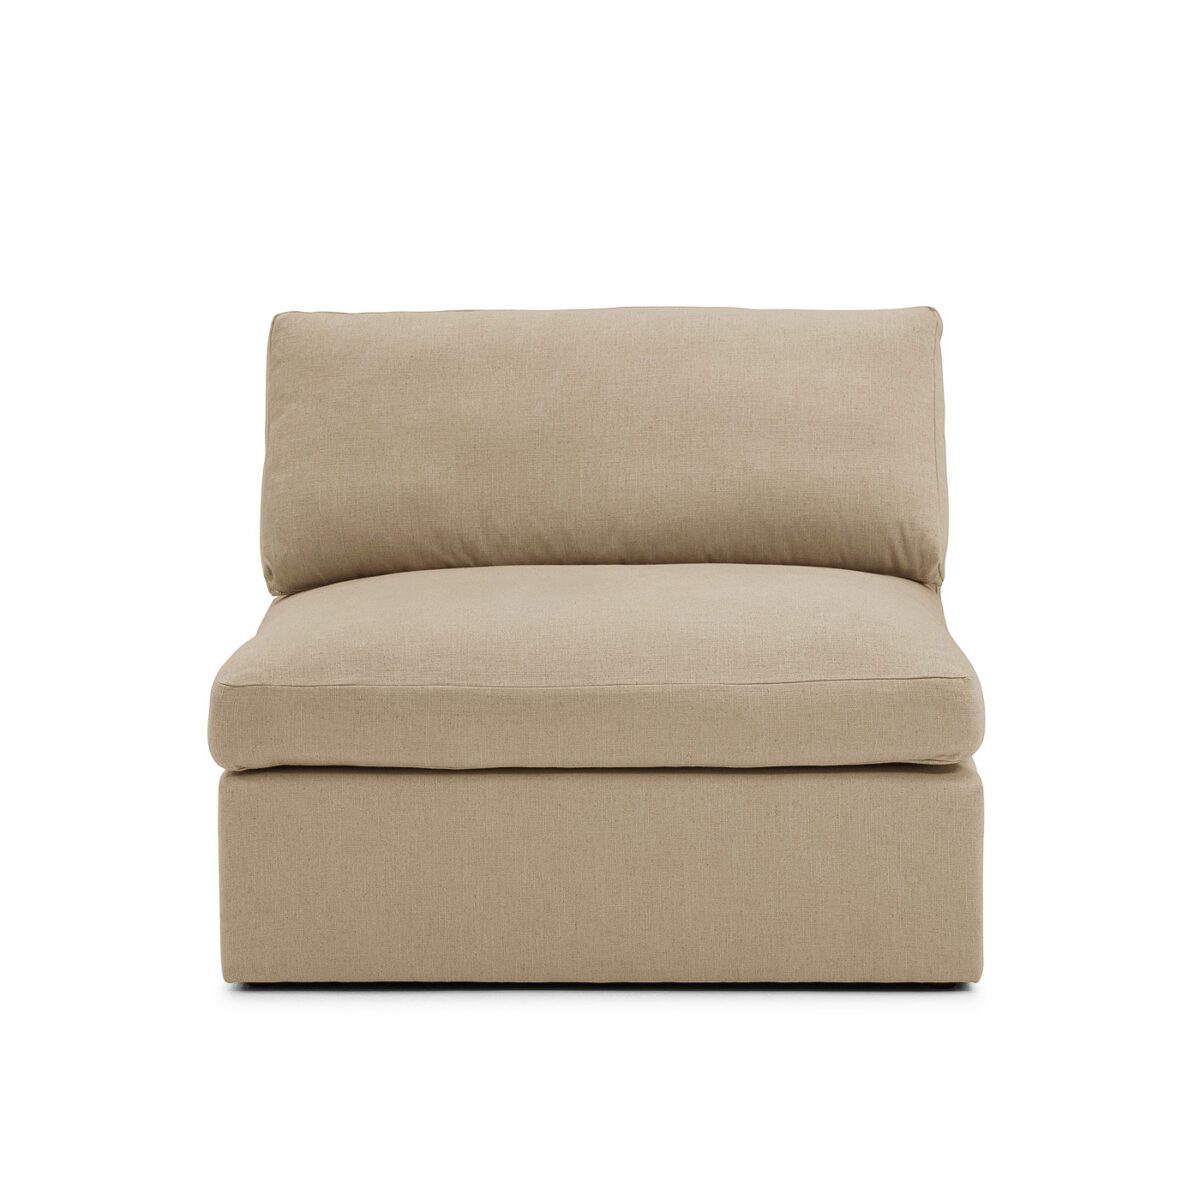 Lucie Grande 3-Seat Sofa (Without Armrests) Khaki